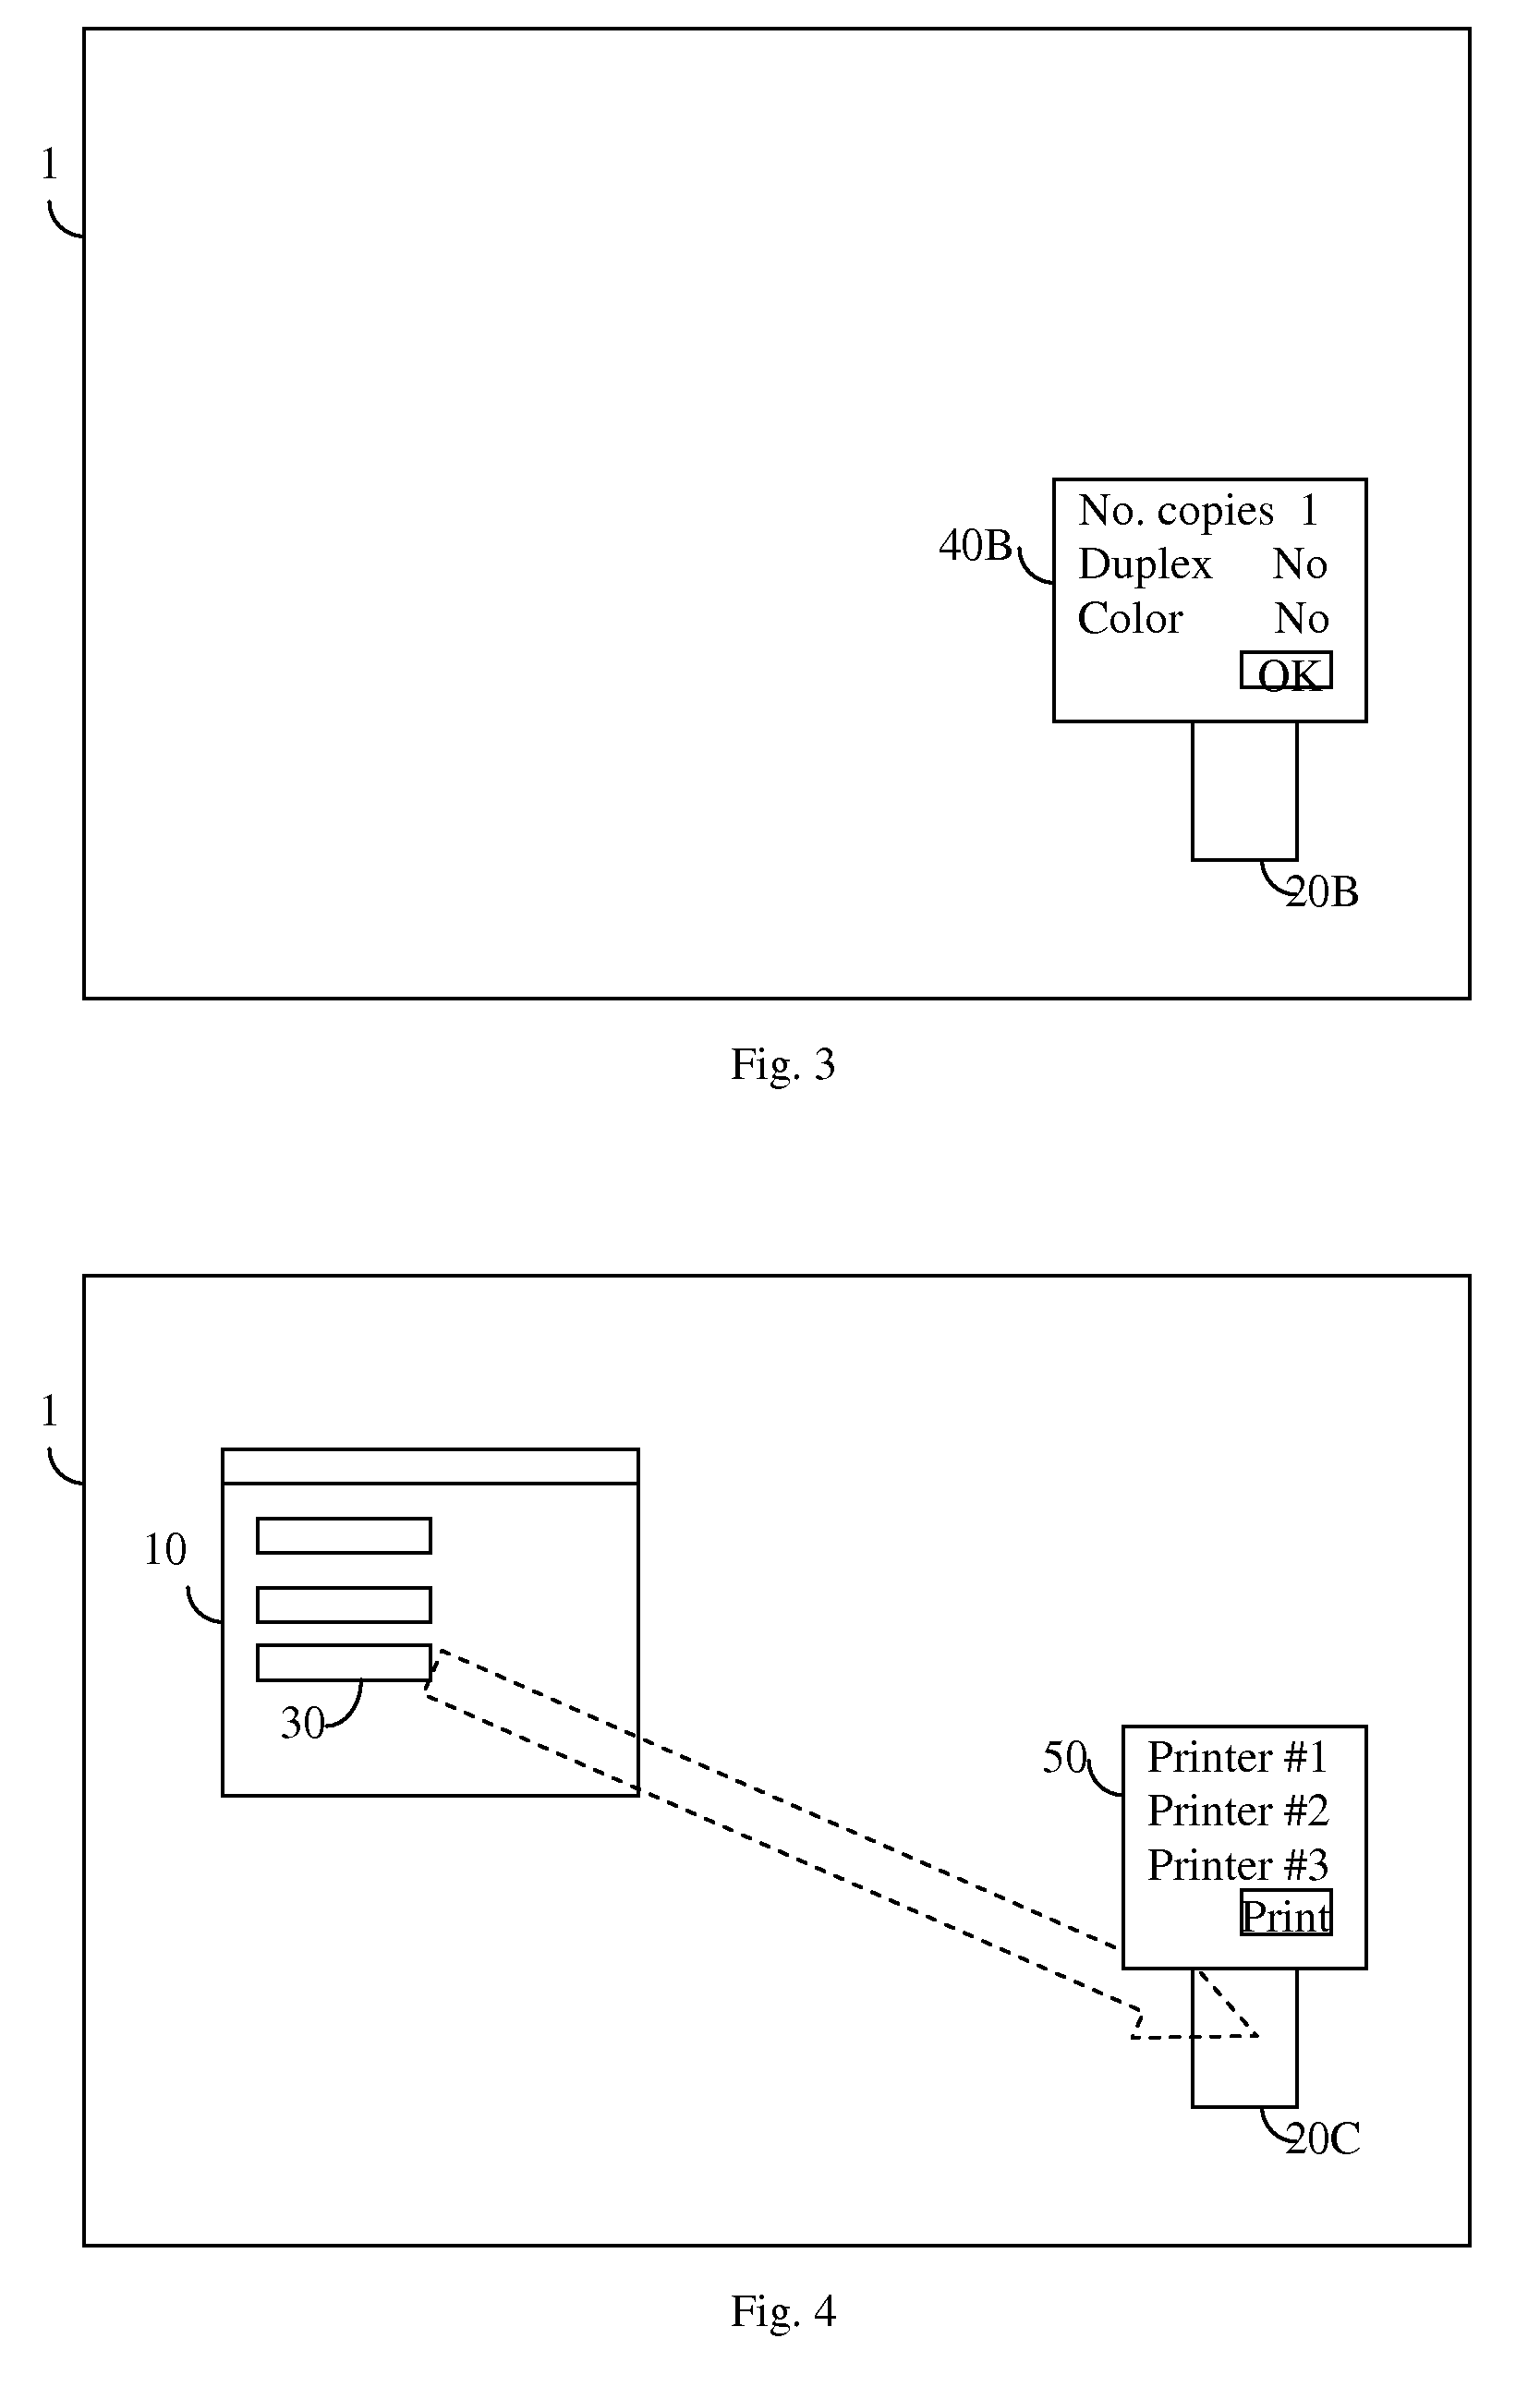 Drag-and-drop printing method with enhanced functions